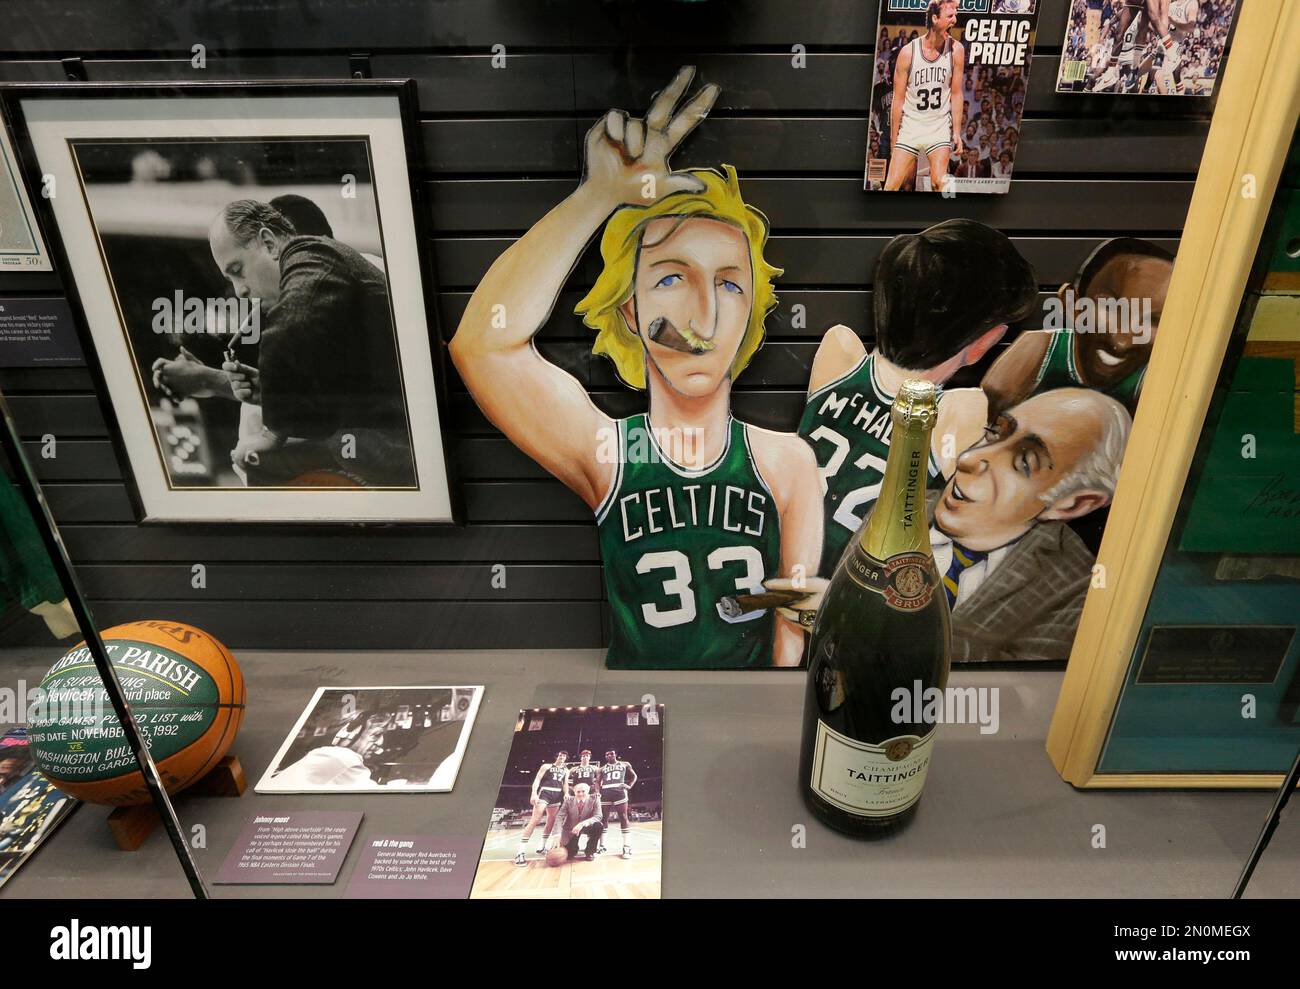 https://c8.alamy.com/comp/2N0MEGX/in-this-thursday-dec-17-2015-photo-a-depiction-of-former-boston-celtics-basketball-player-larry-bird-center-rests-in-a-display-case-near-a-photograph-of-former-celtics-coach-red-auerbach-left-in-an-exhibit-in-the-sports-museum-at-the-td-garden-in-boston-curators-have-teamed-up-with-professional-archivists-to-preserve-the-estimated-7-million-collection-much-of-which-is-kept-in-off-site-storage-that-was-threatened-by-last-winters-historic-snows-ap-photosteven-senne-2N0MEGX.jpg